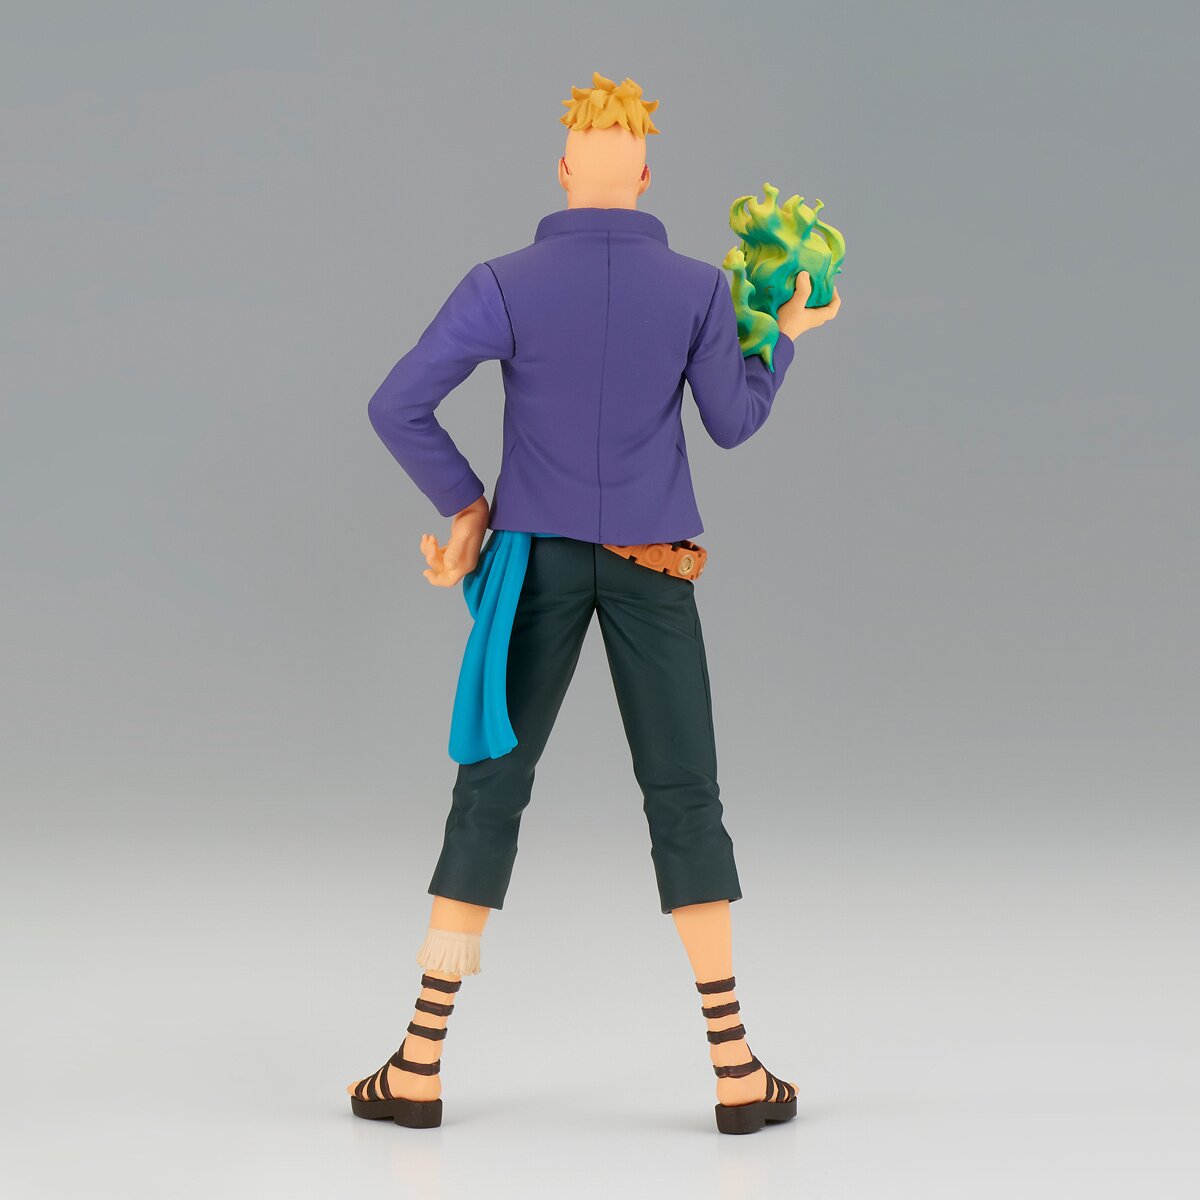 ONE PIECE - DXF - THE GRANDLINE MEN - Wano Country vol.21 - Marco